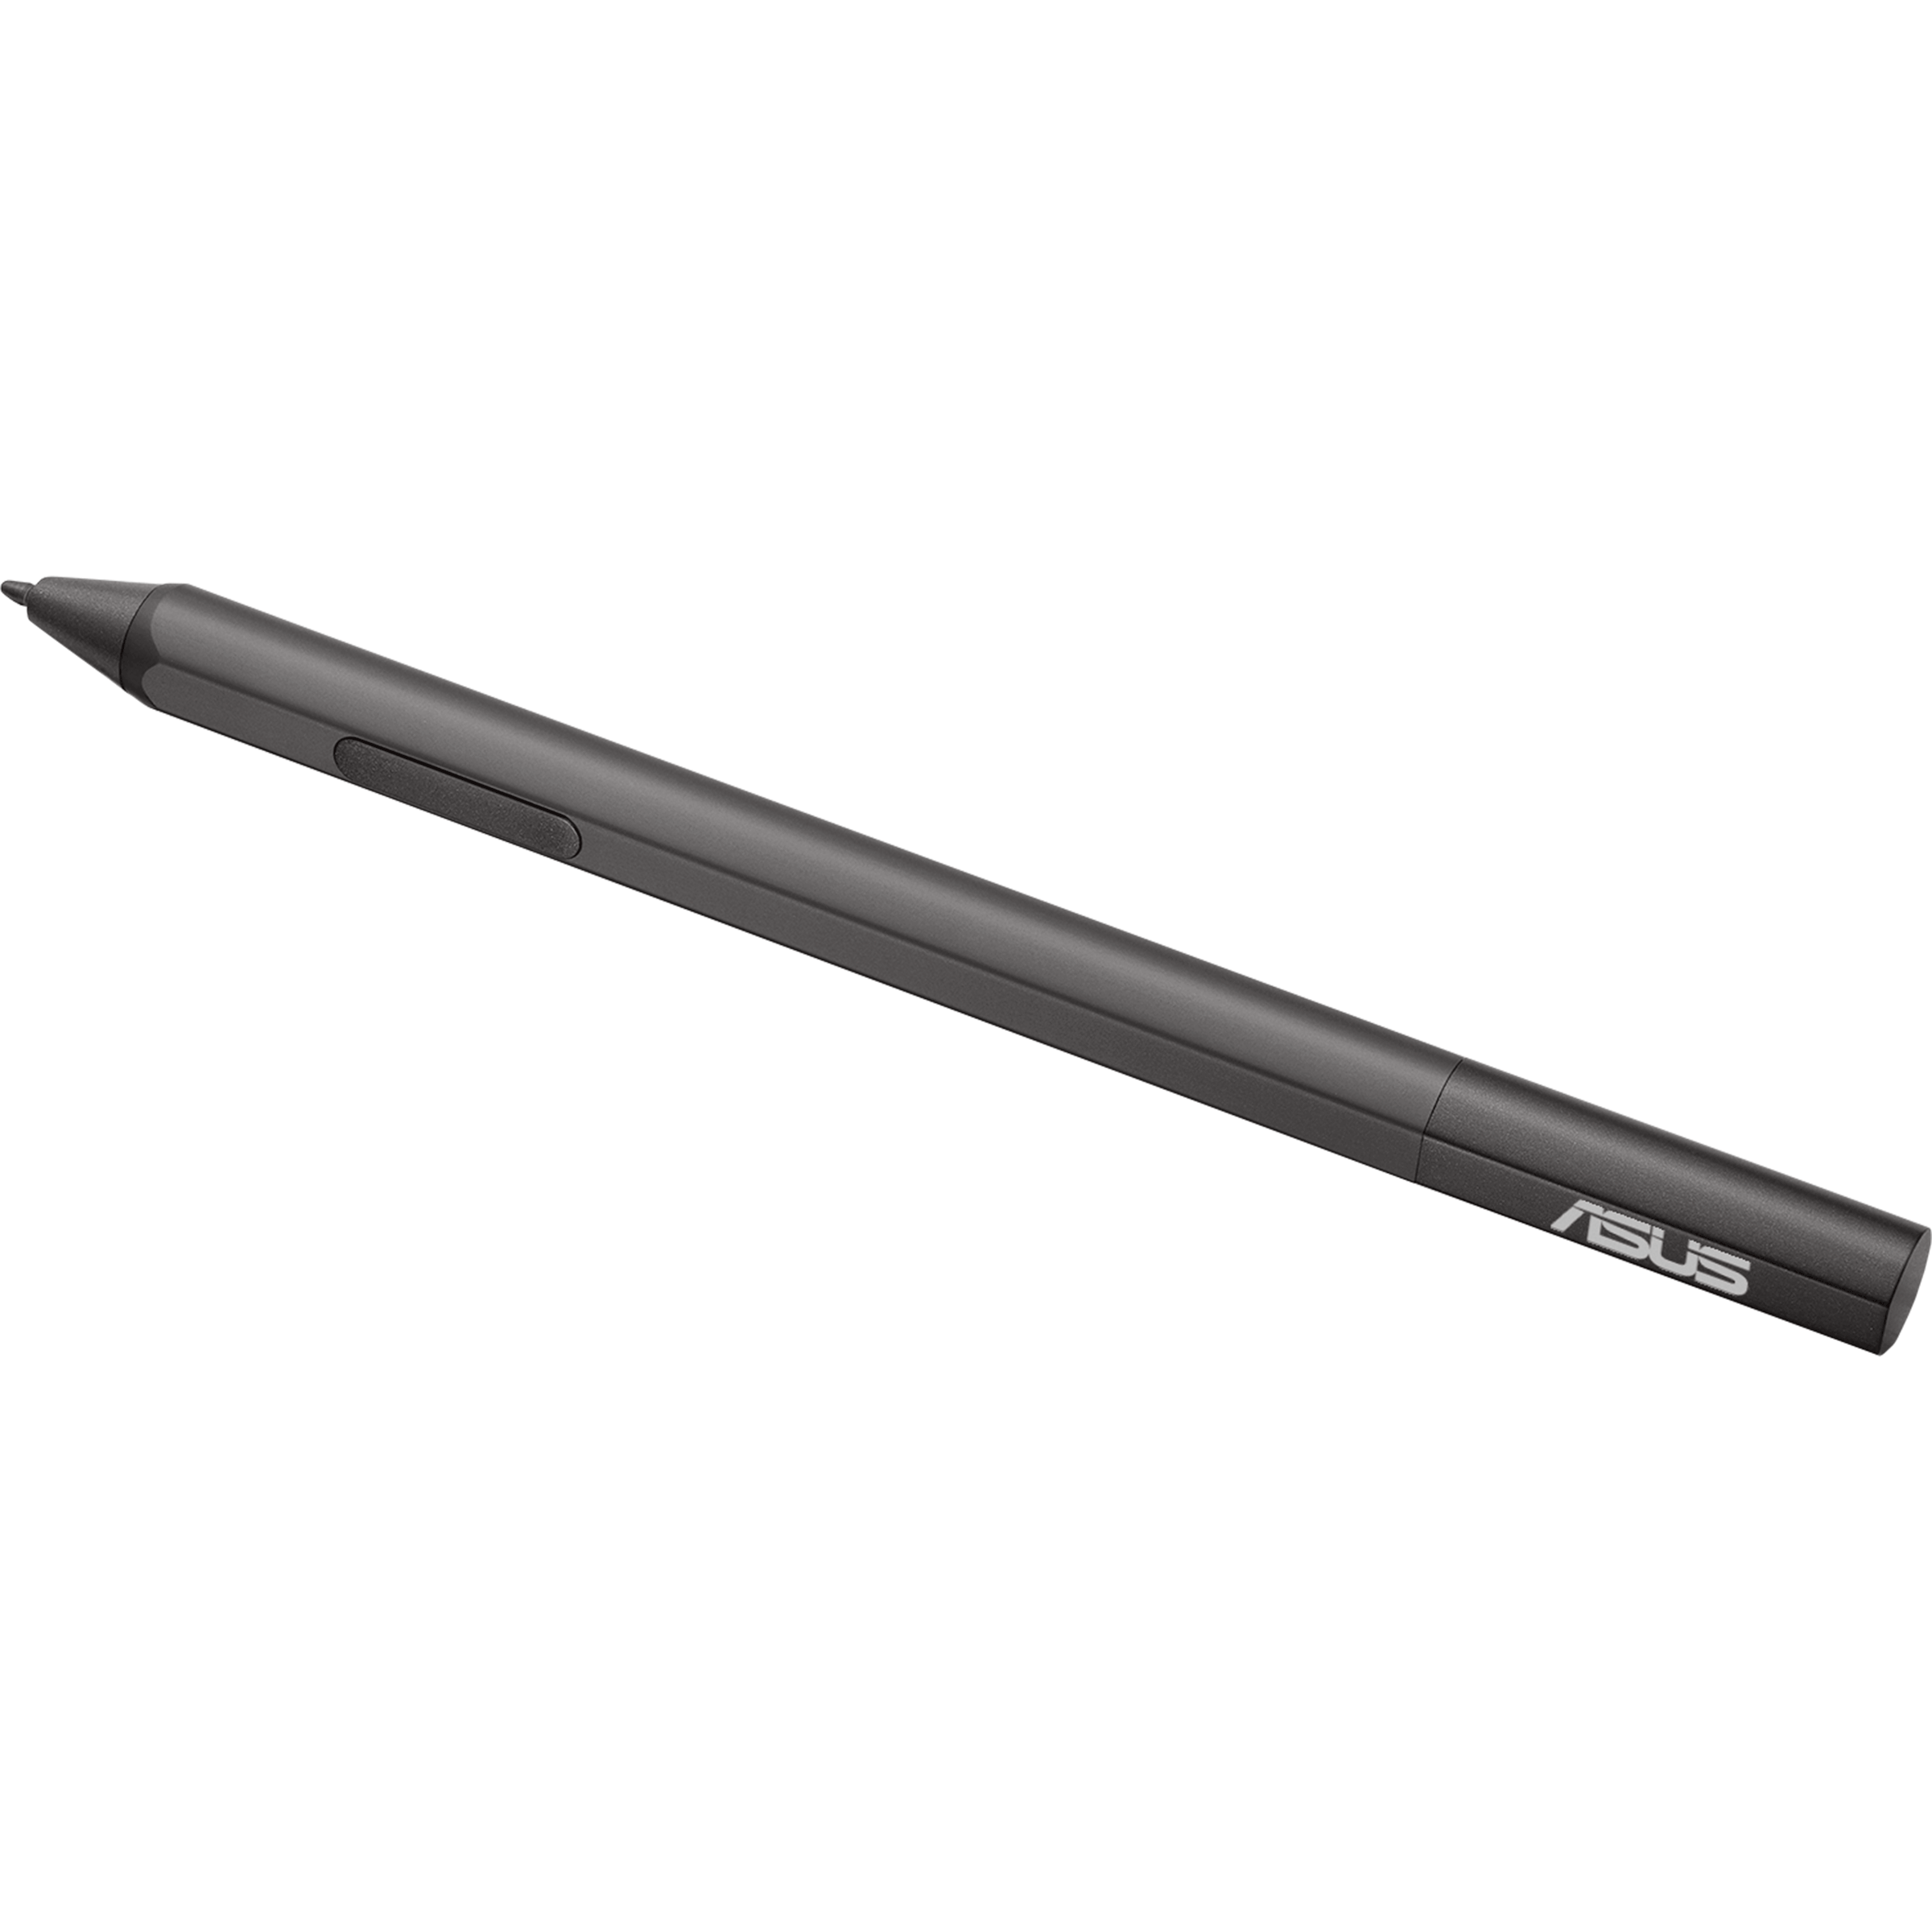 2-in-1 Precision Stylus for ROG Ally - Precision, Versatility and